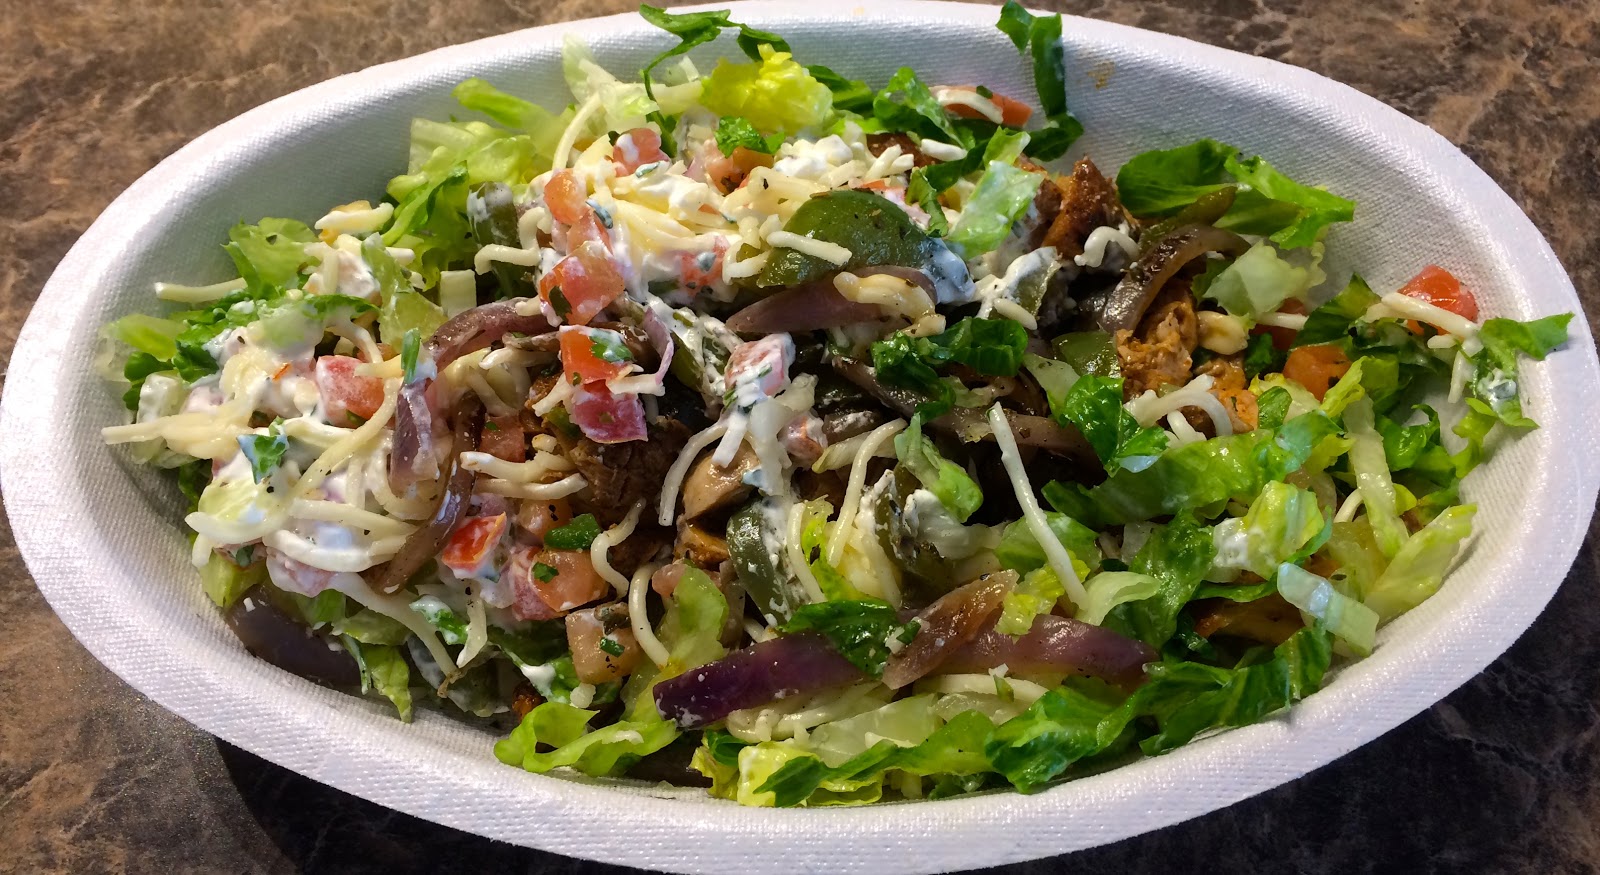 Grand Opening: Chipotle Restaurant Review - Fuquay Varina, NC - Blue Skies for Me Please